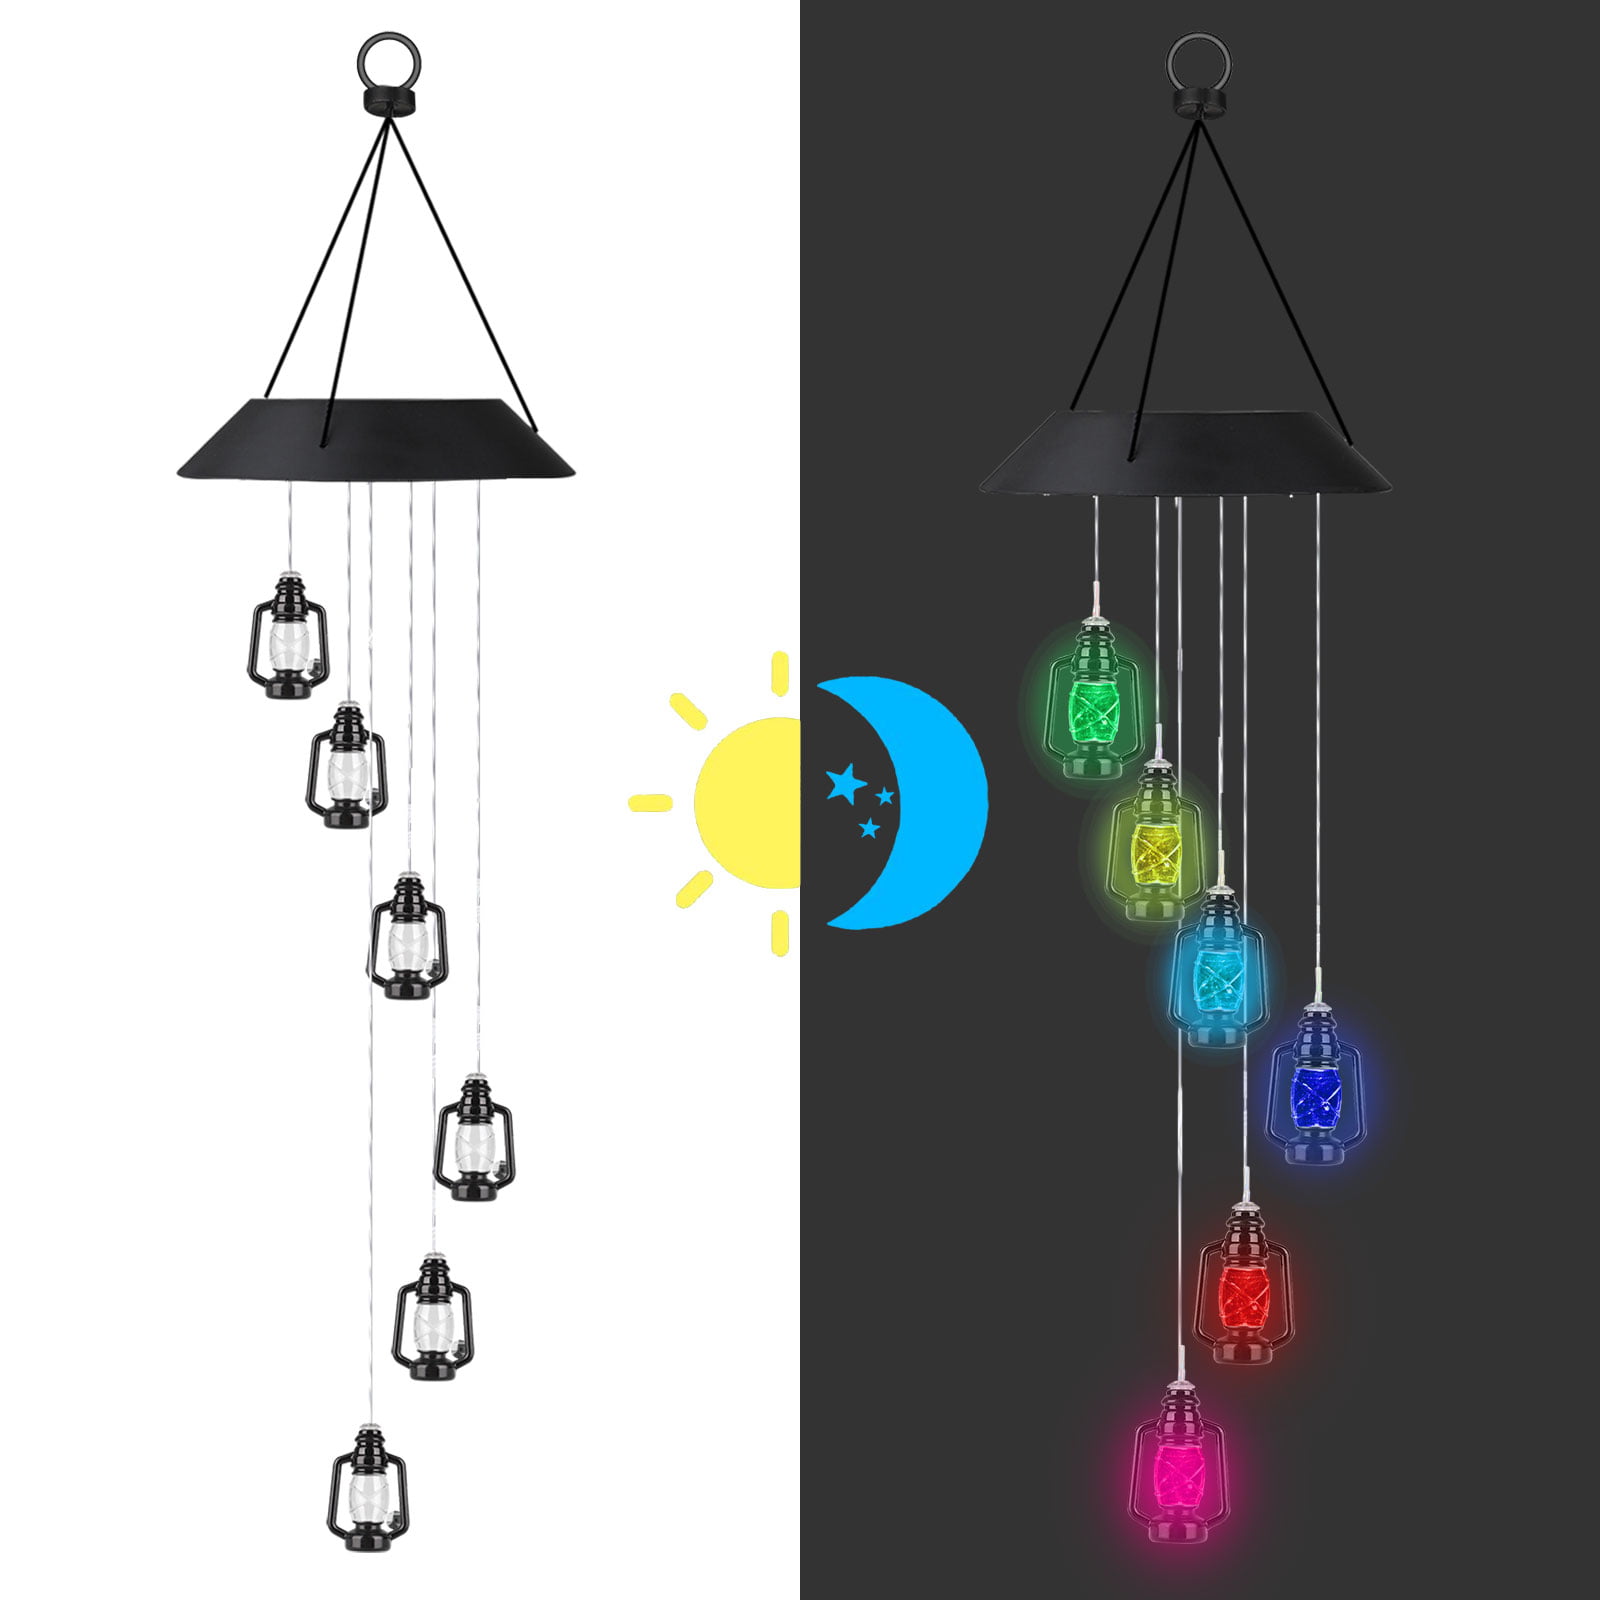 Waterproof LED Wind Chimes for Outside Housewarming Gifts for Garden Patio Yard Home Decor Solar Powered Memorial Wind Chimes with Lights Rizzon Solar Wind Chimes Changing Colors